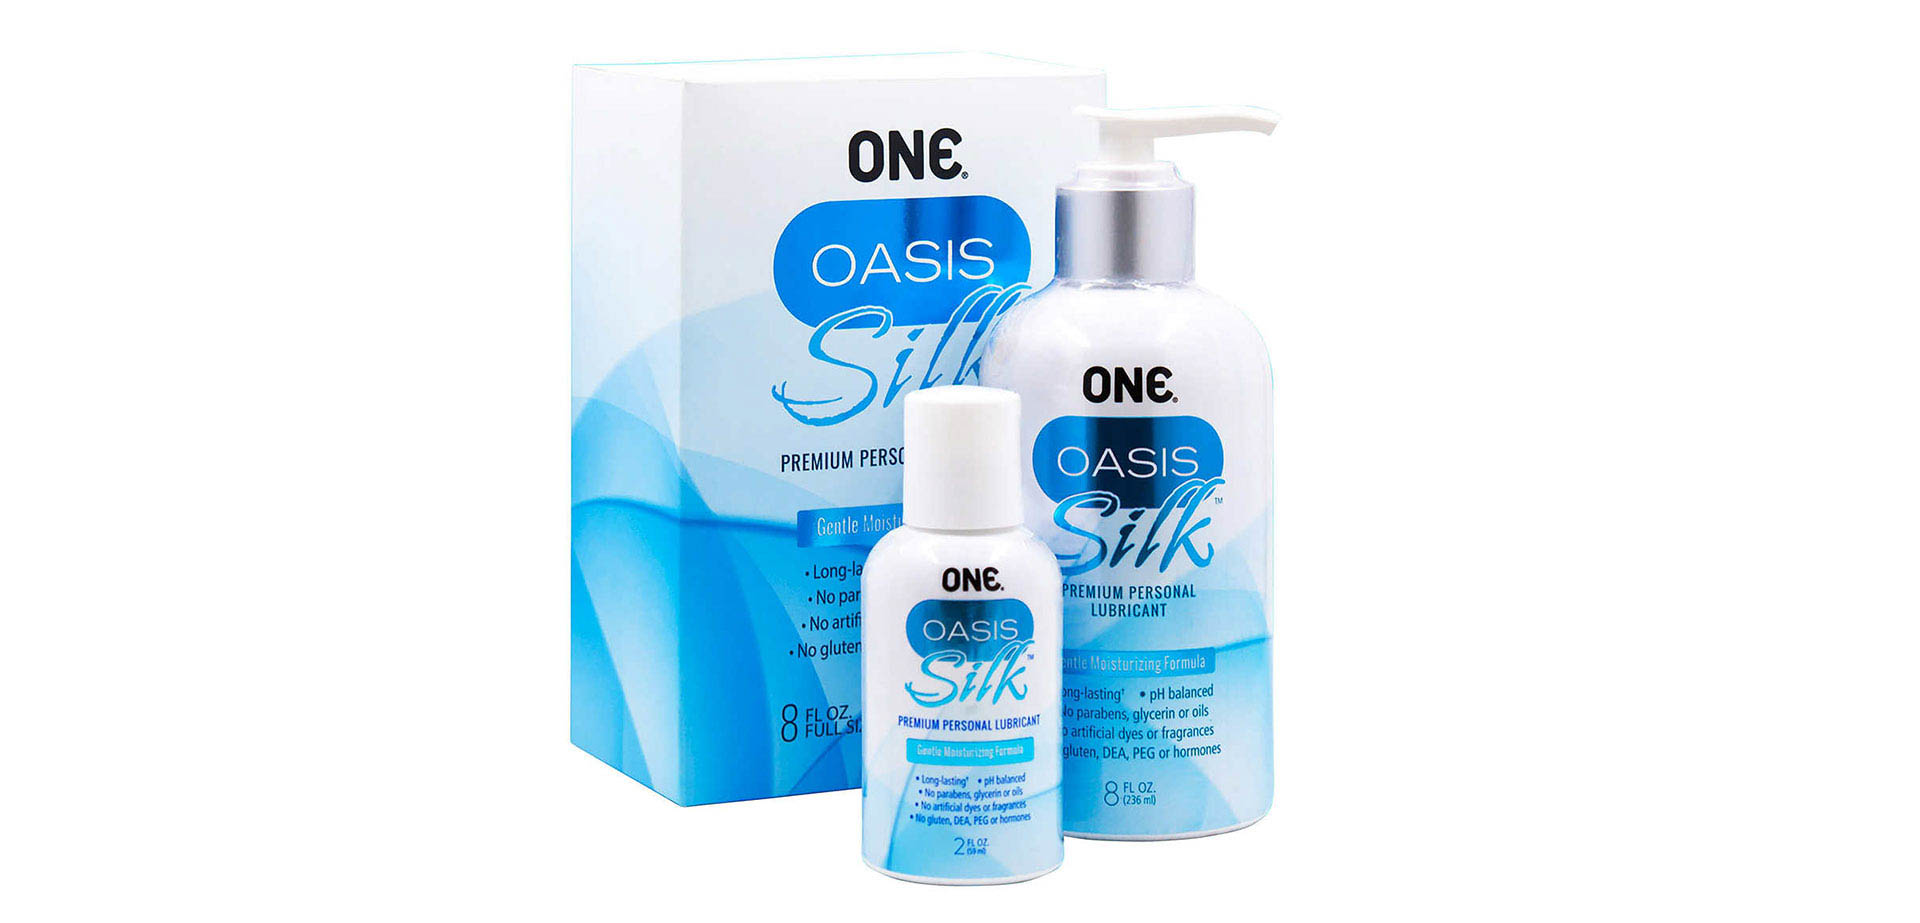 ONE Oasis Silk Premium Personal Lubricant.